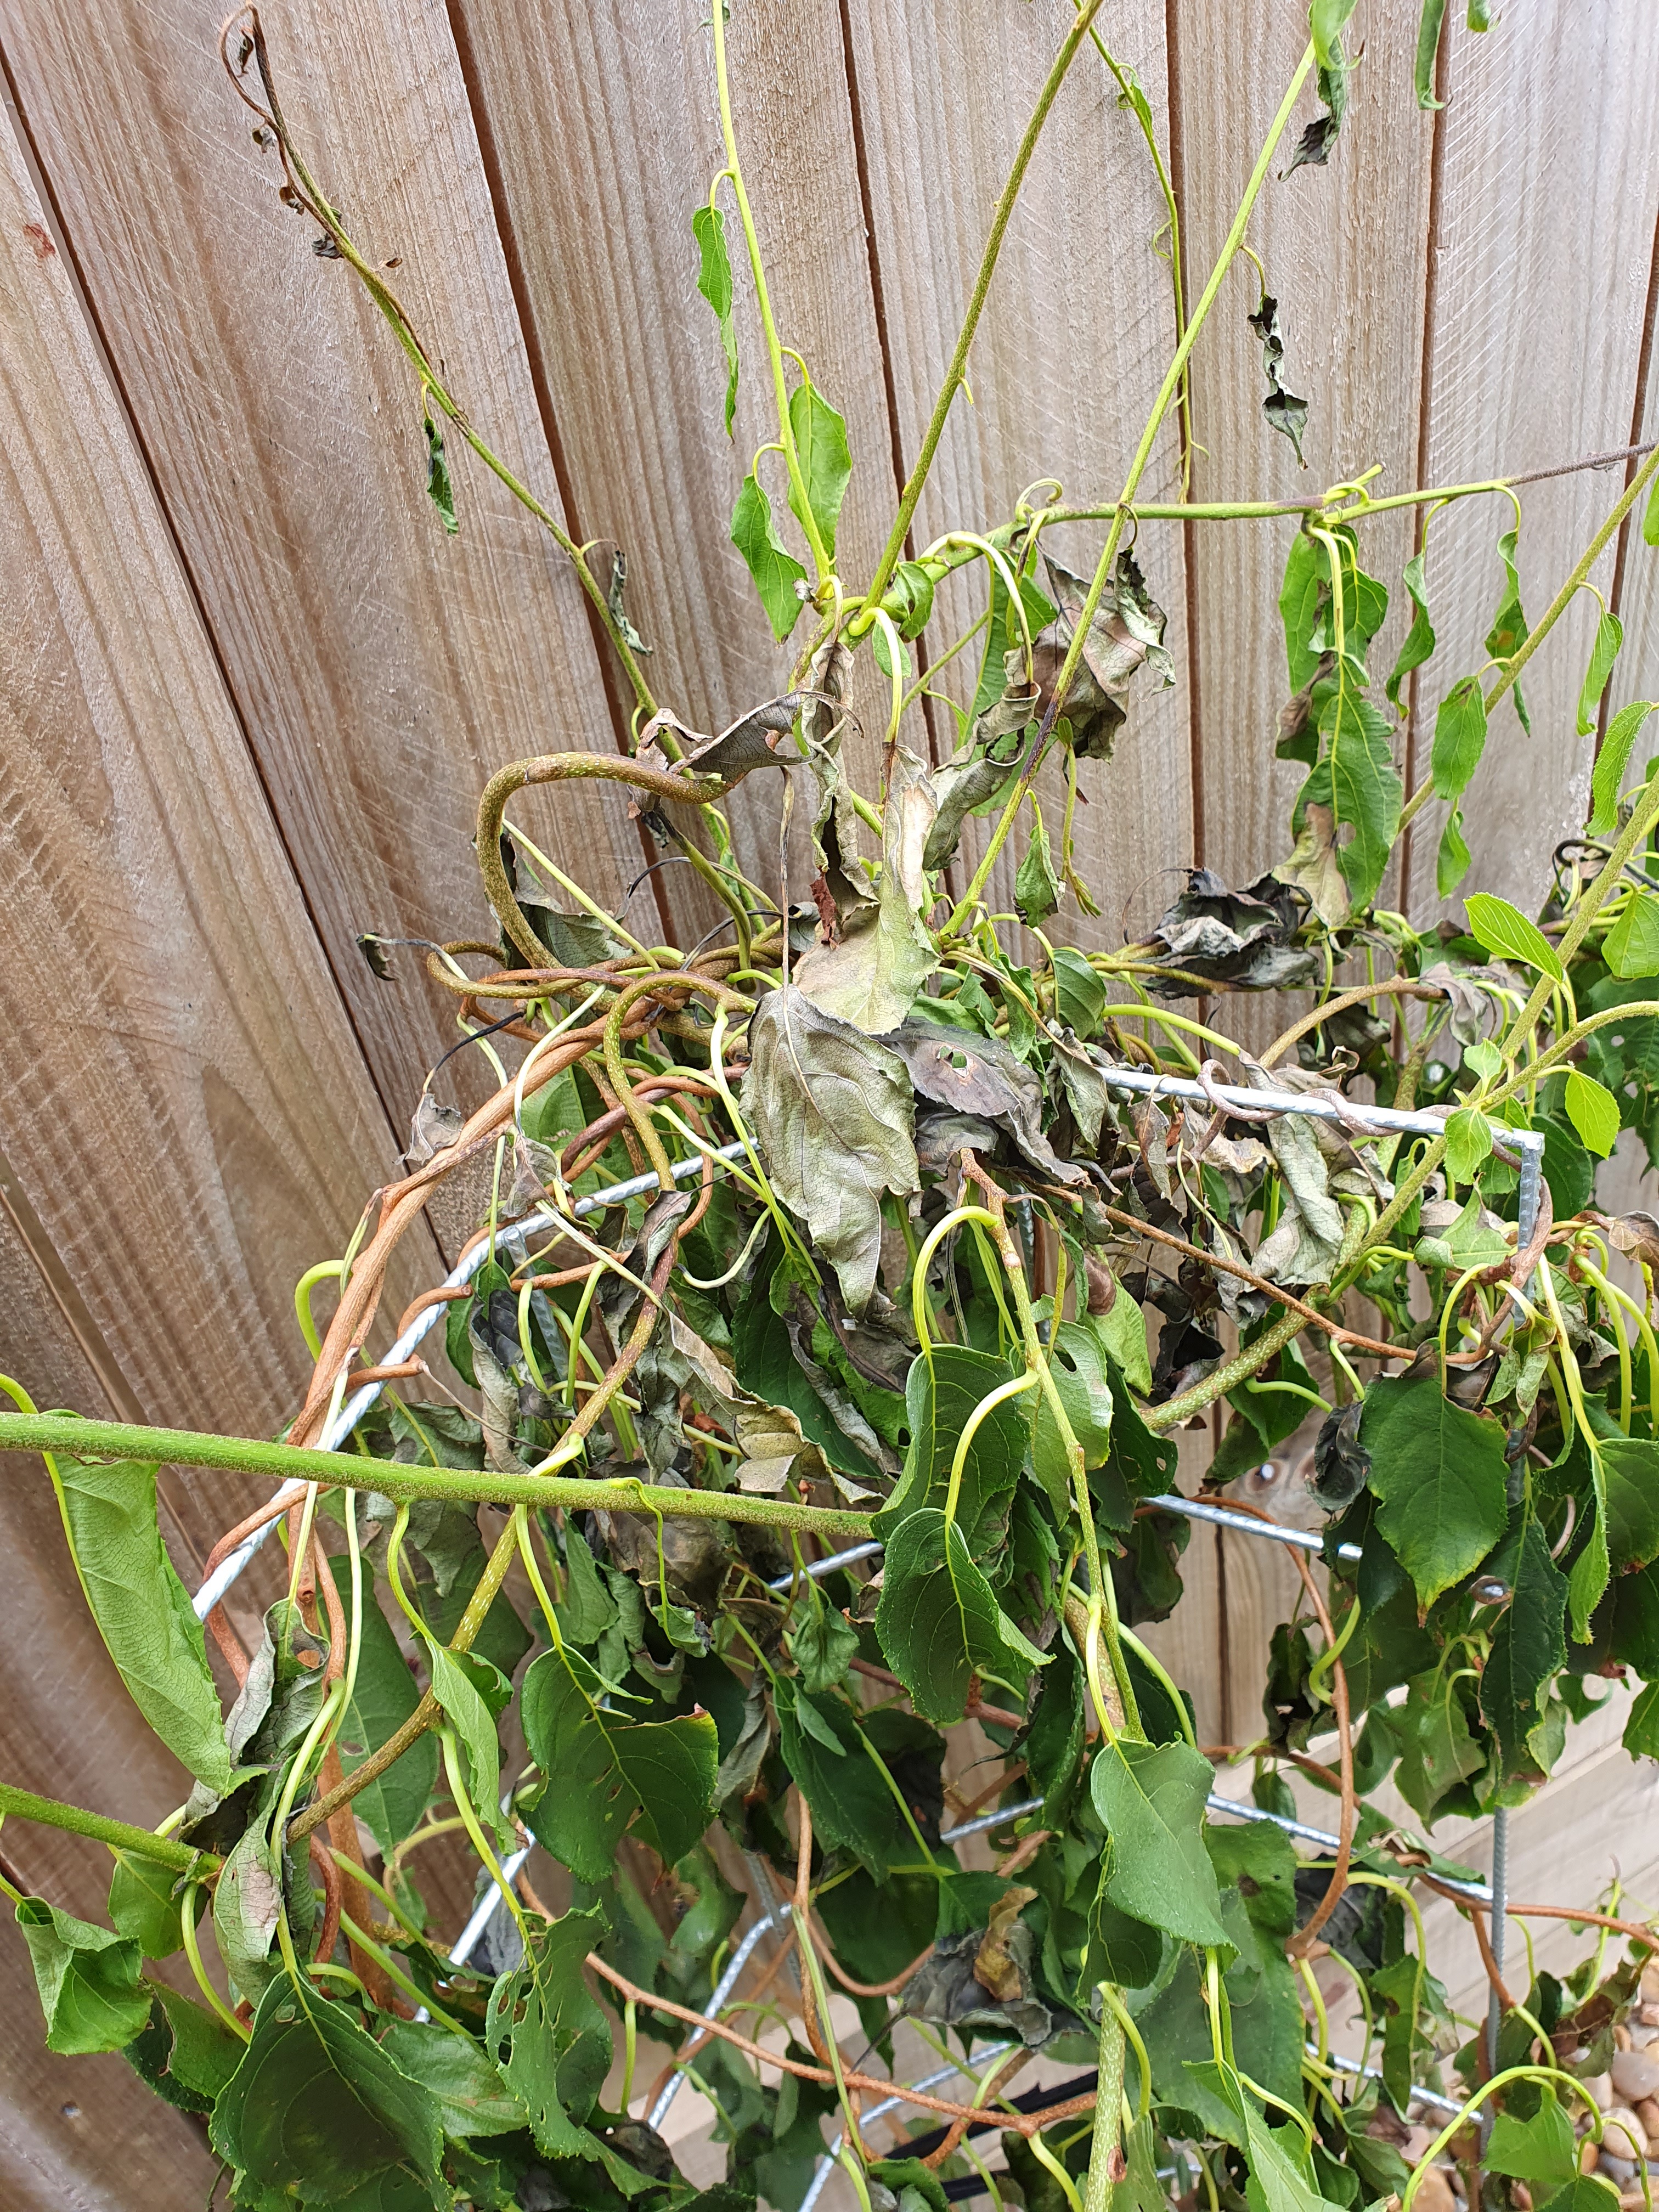 Pic 1 of damage to Kiwiberry, burnt leaves on top of plant.